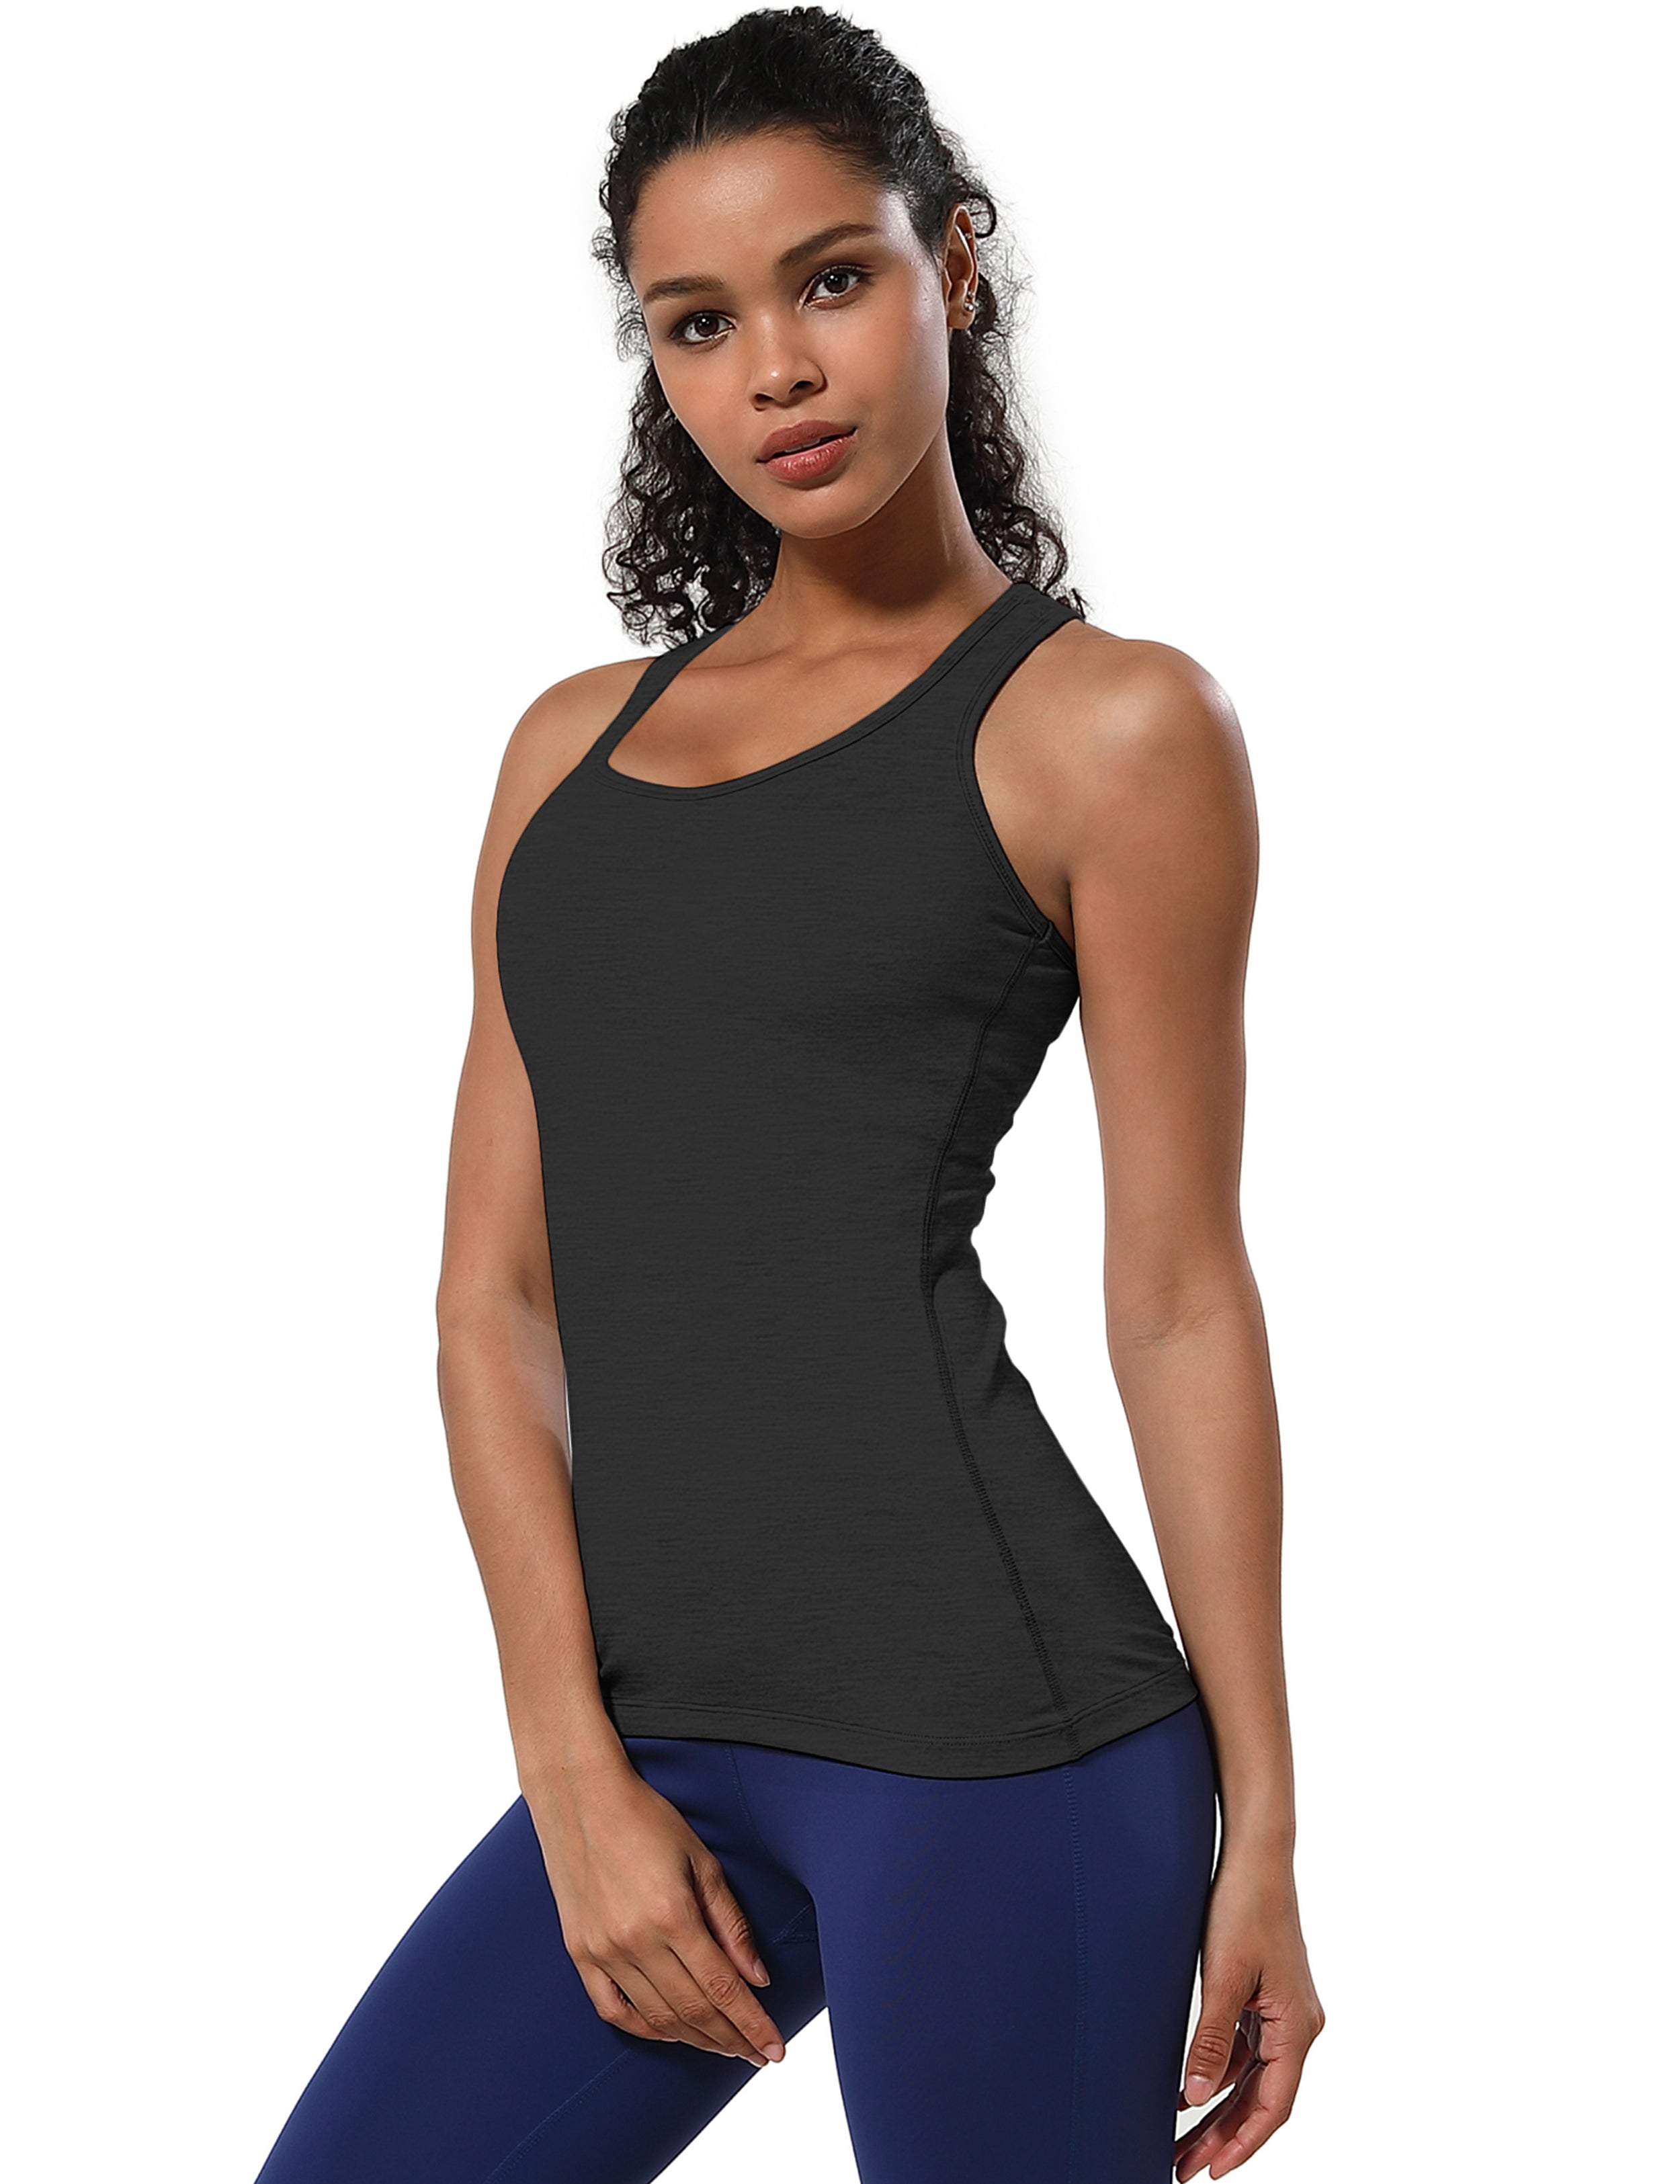 Racerback Athletic Tank Tops heathercharcoal 92%Nylon/8%Spandex(Cotton Soft) Designed for Jogging Tight Fit So buttery soft, it feels weightless Sweat-wicking Four-way stretch Breathable Contours your body Sits below the waistband for moderate, everyday coverage